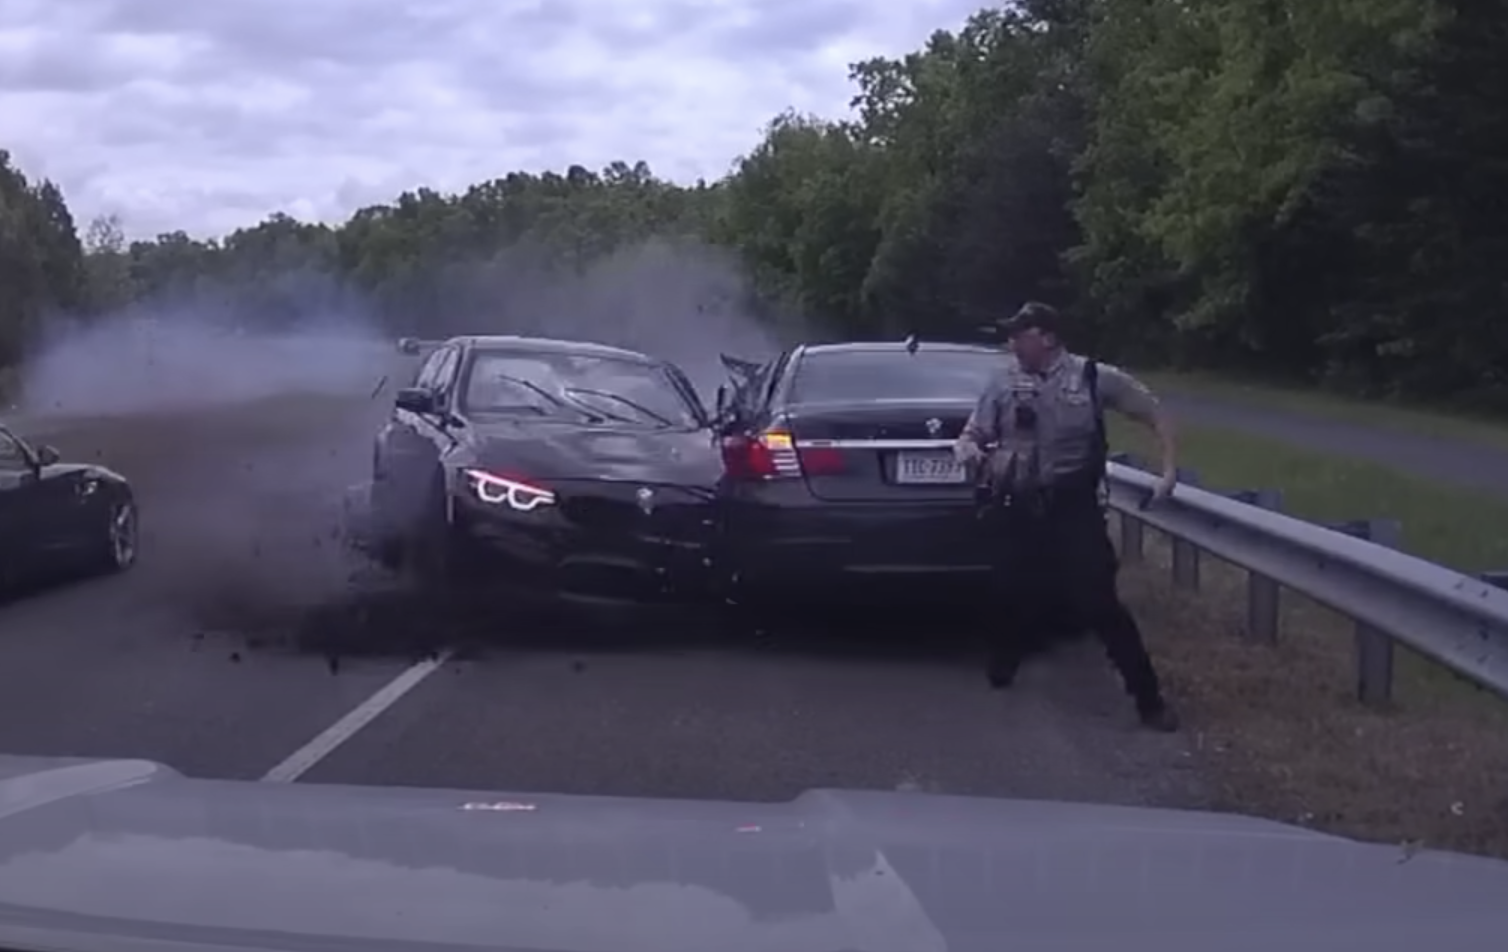 French Police Crush Two BMWs For Being Filmed Drifting On Public Roads